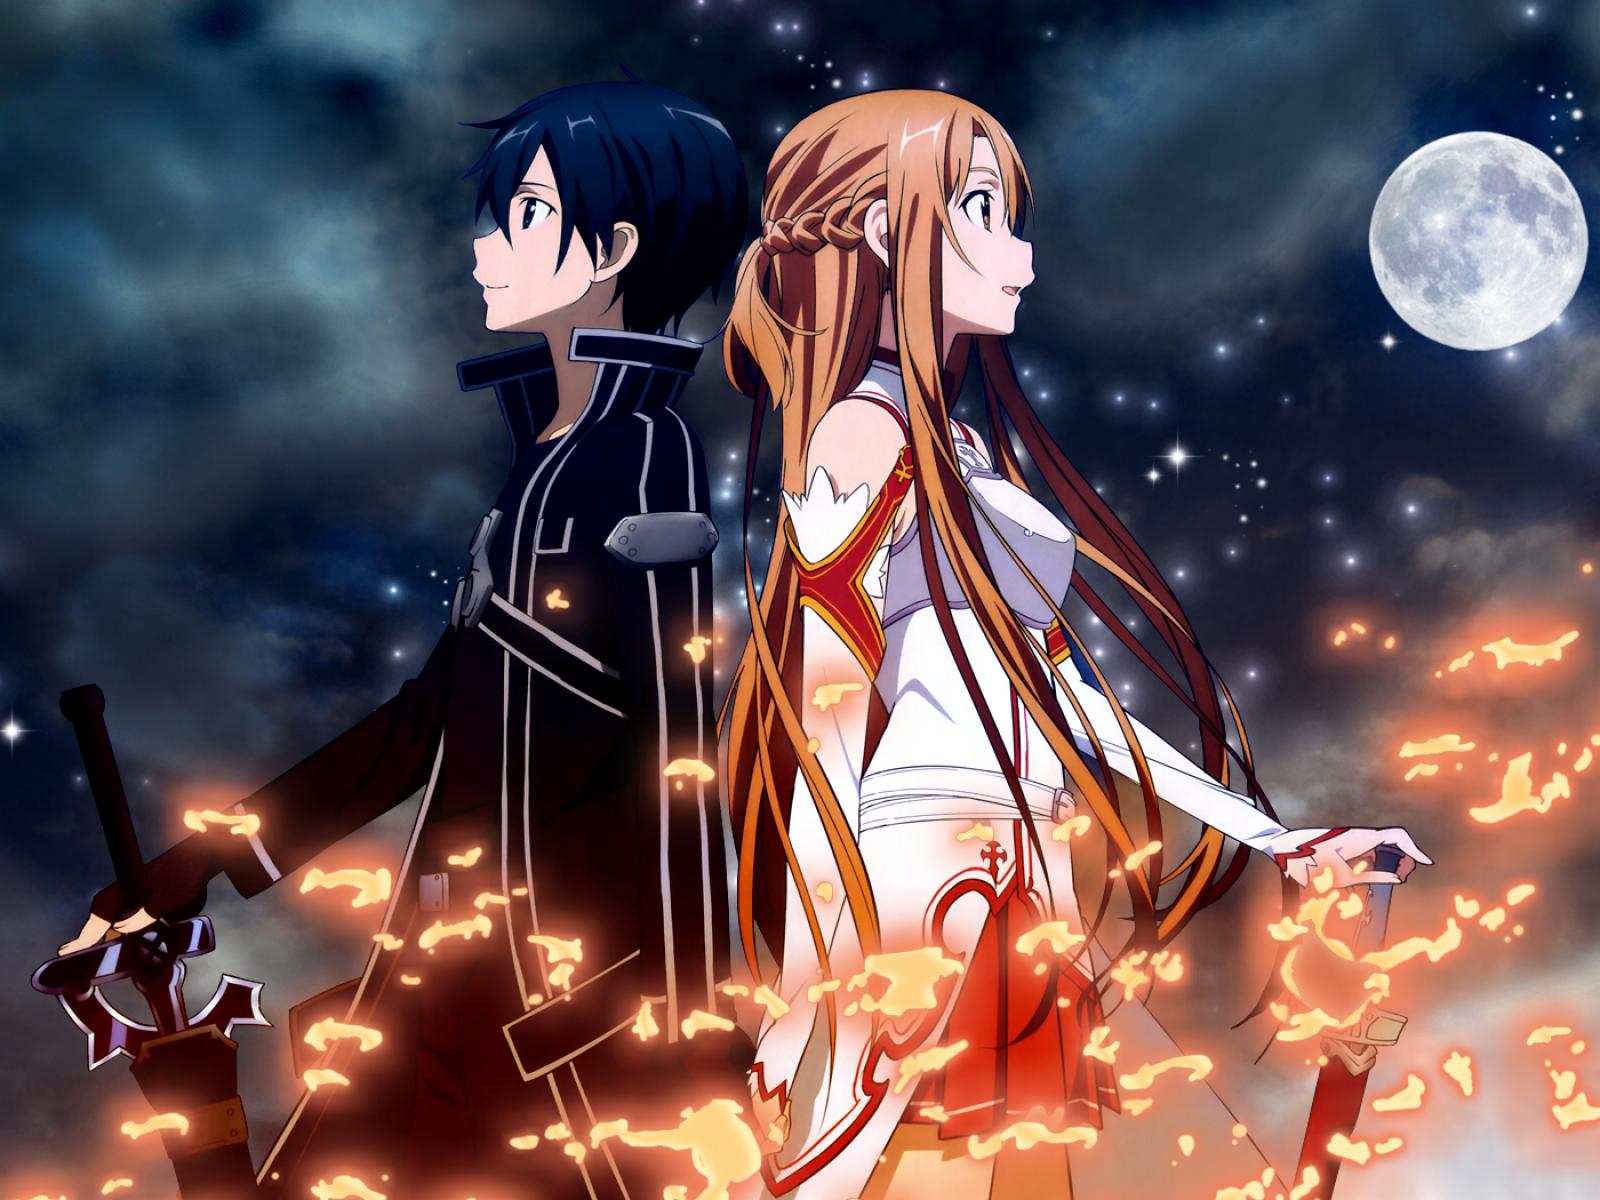 Sword art online: anime you need to watch